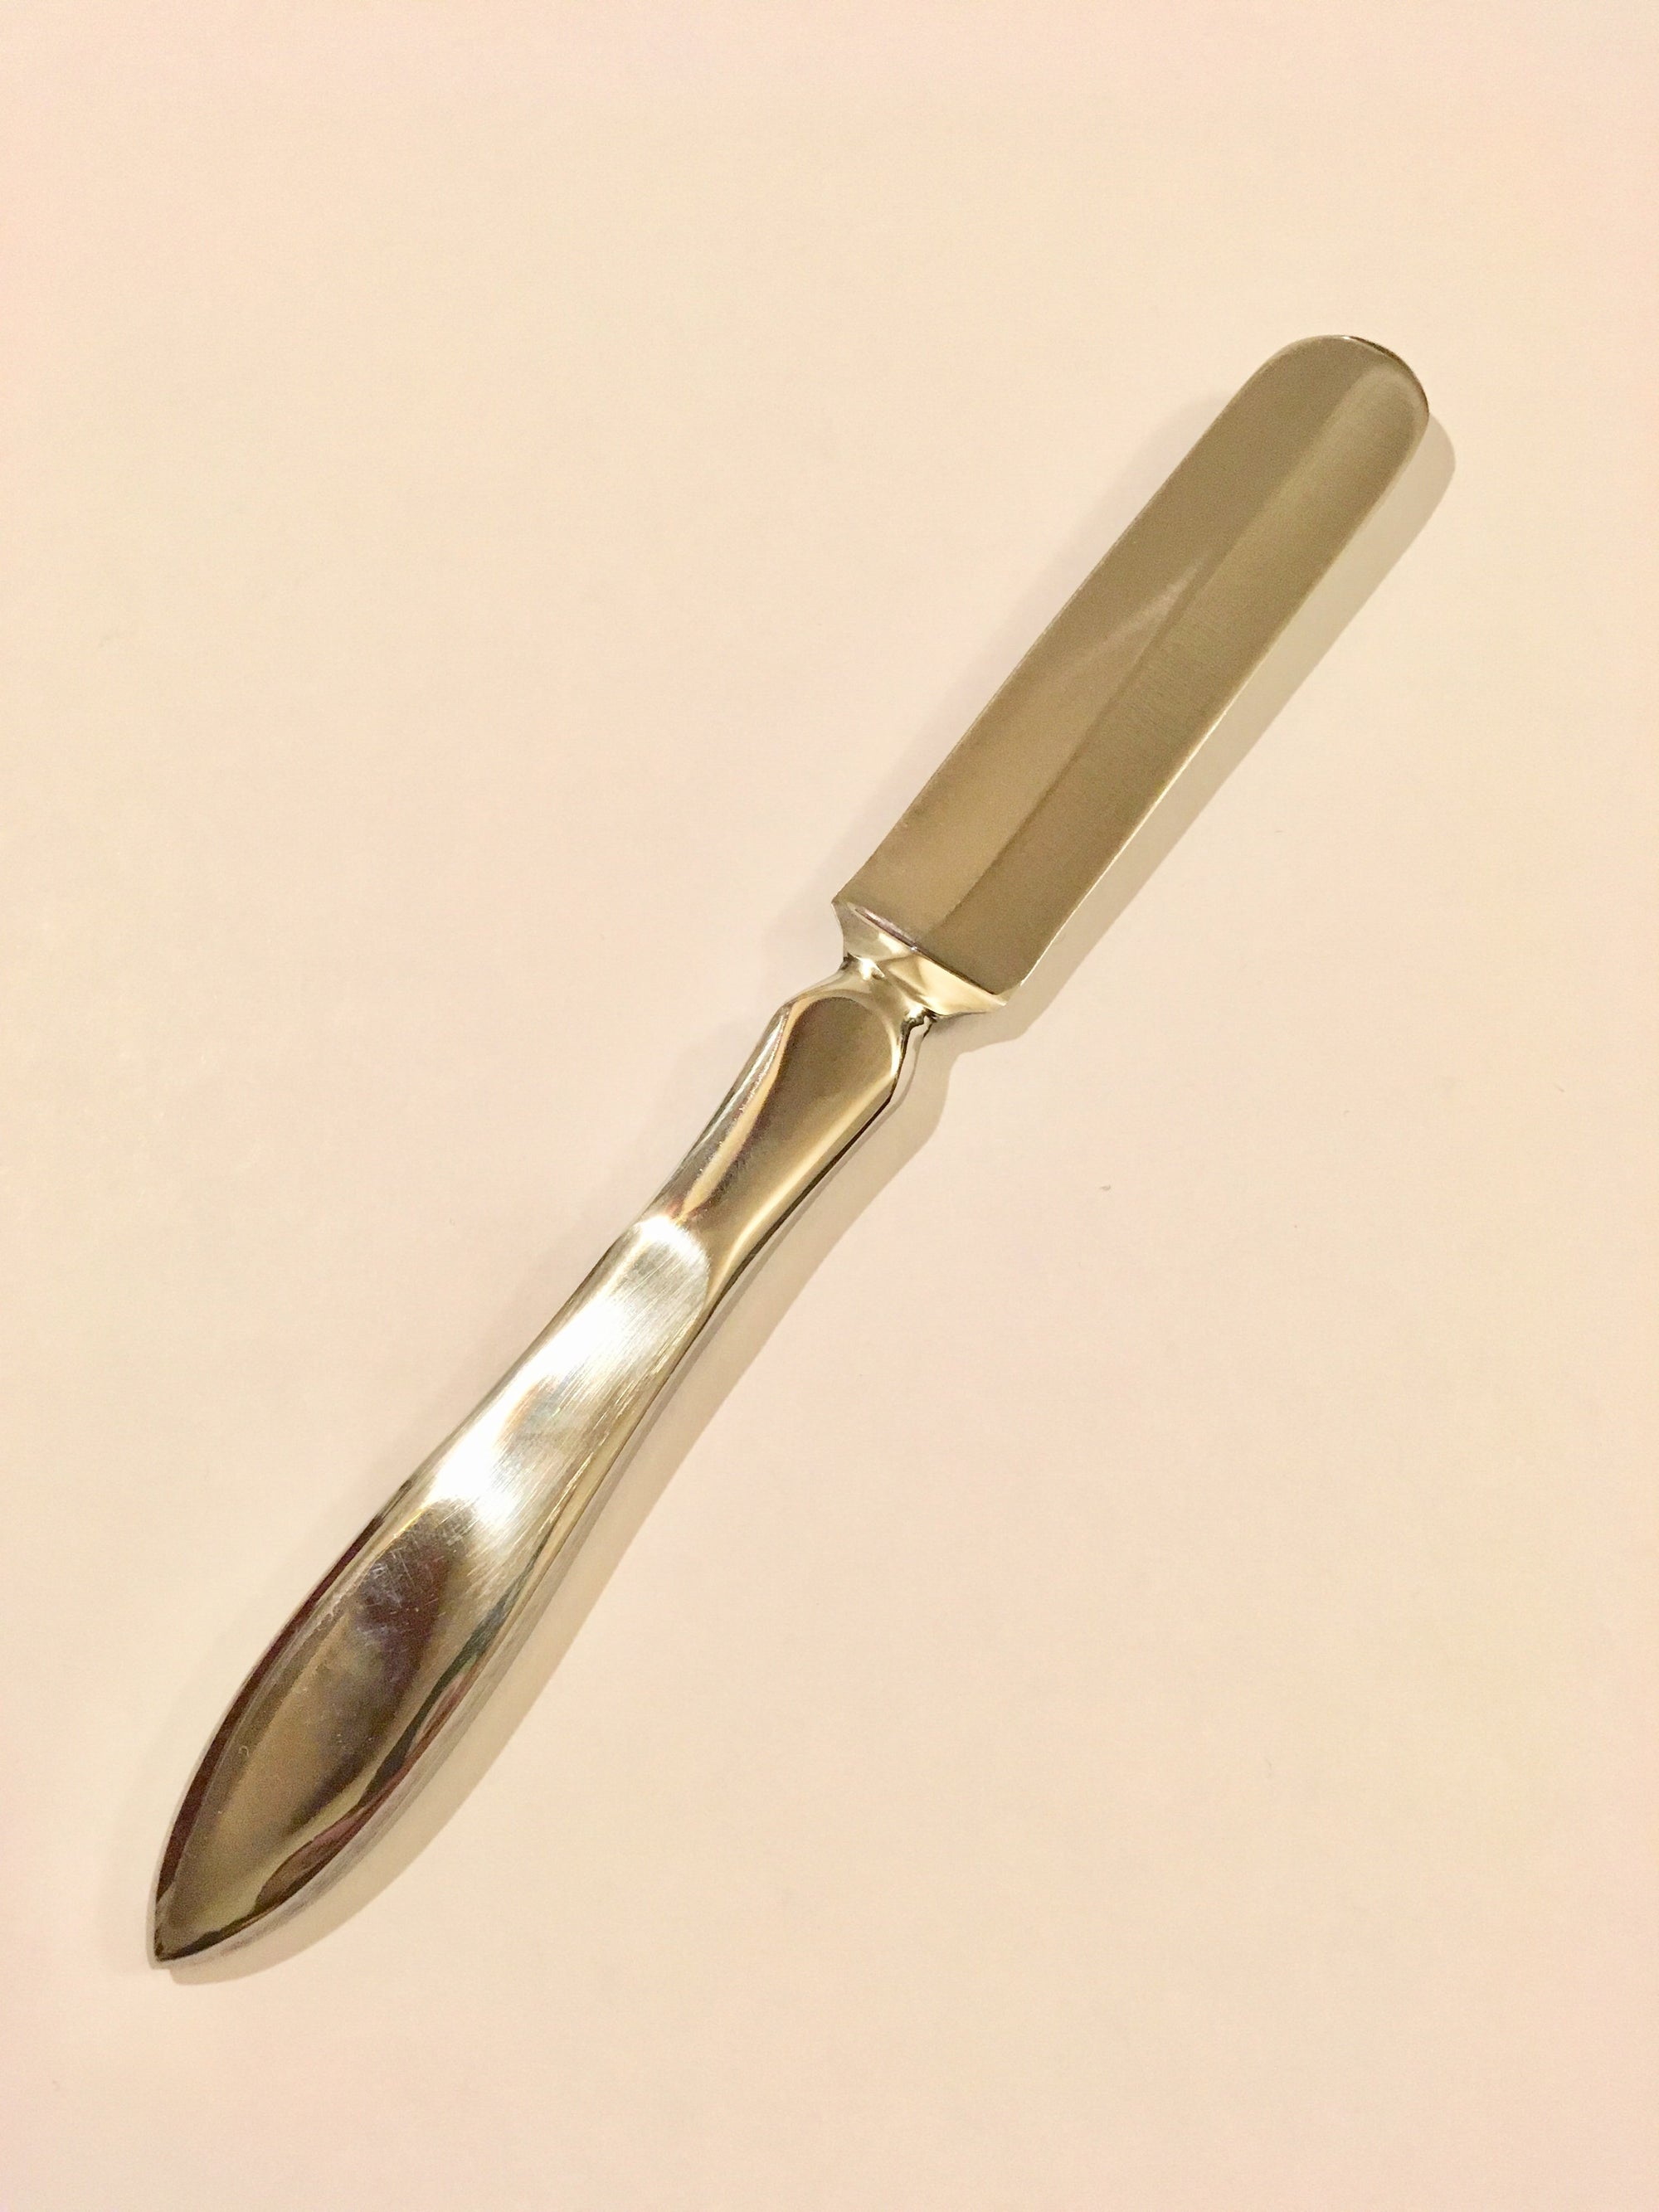 Mohel messer brit milah knife surgical stainless custom Judaica by Laevi Susman